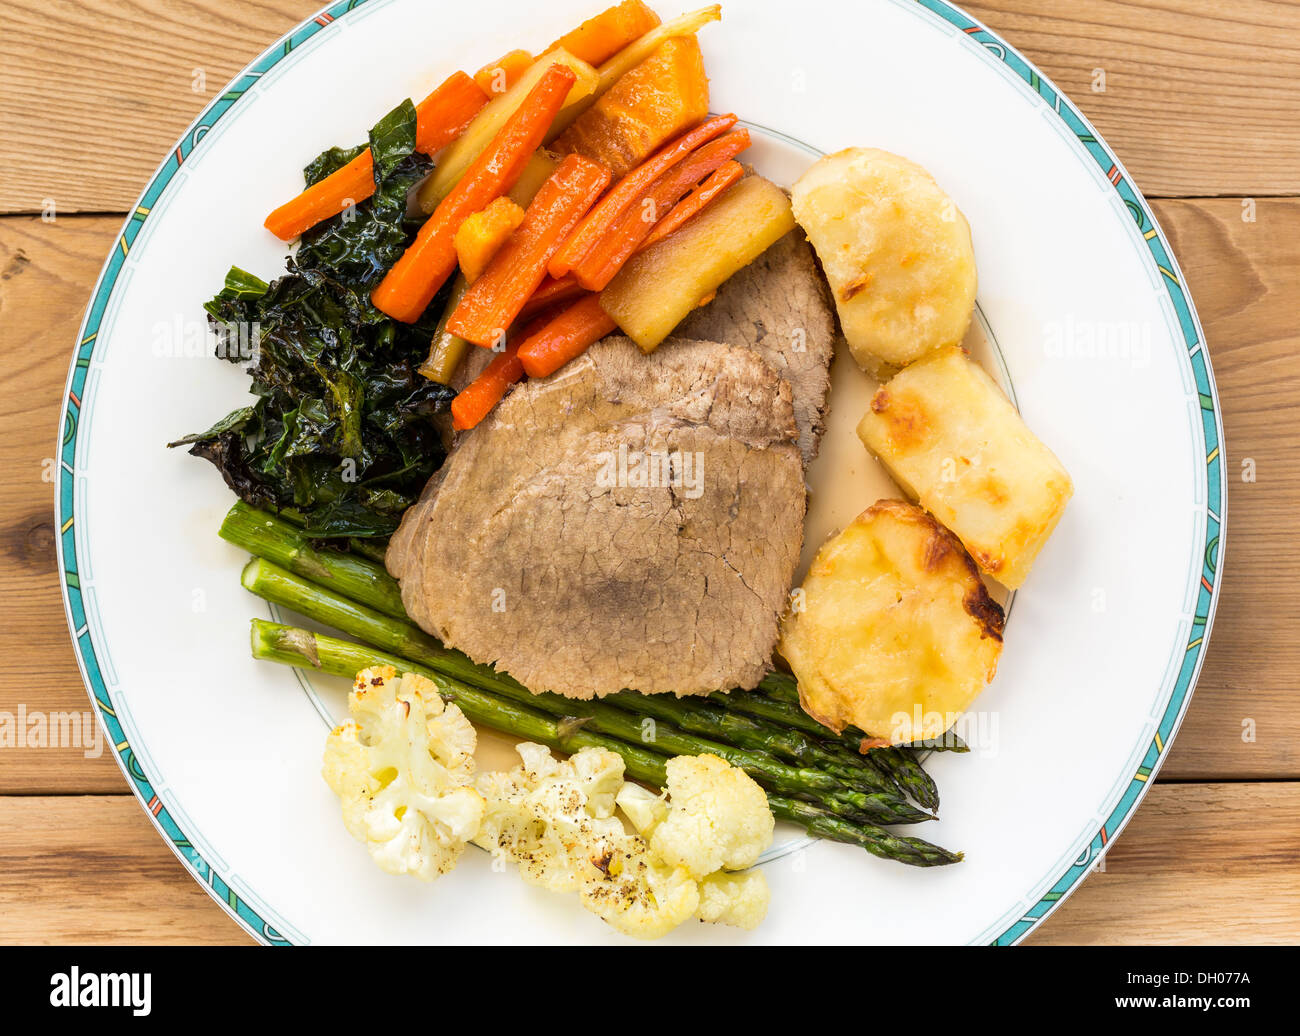 Traditional British Sunday Lunch - roast beef, roasted potatoes, carrots, parsnips, kale, asparagus and cauliflower on a plate Stock Photo